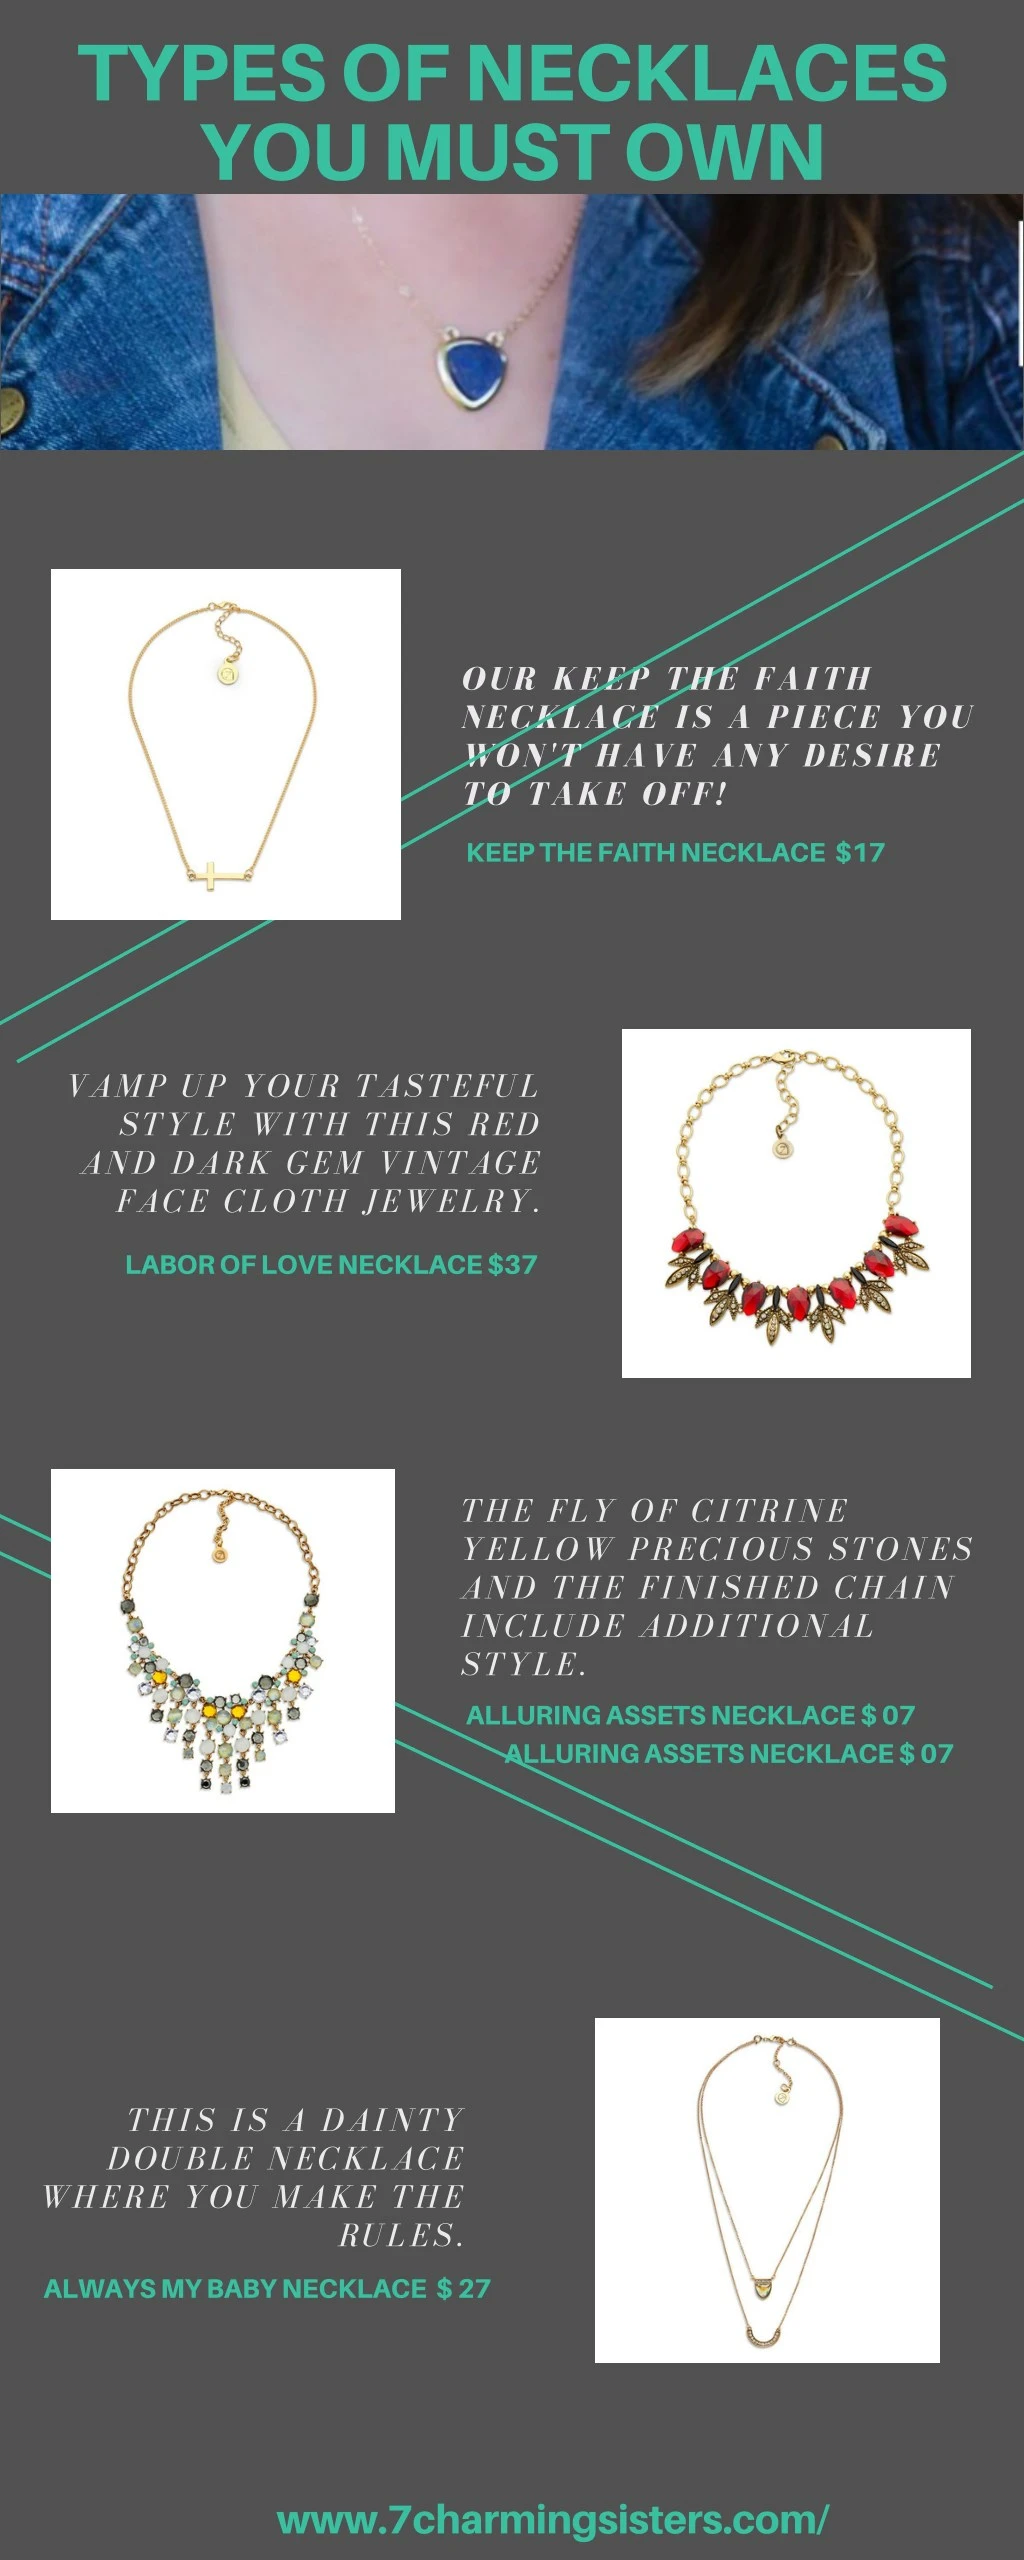 types of necklaces you must own n.